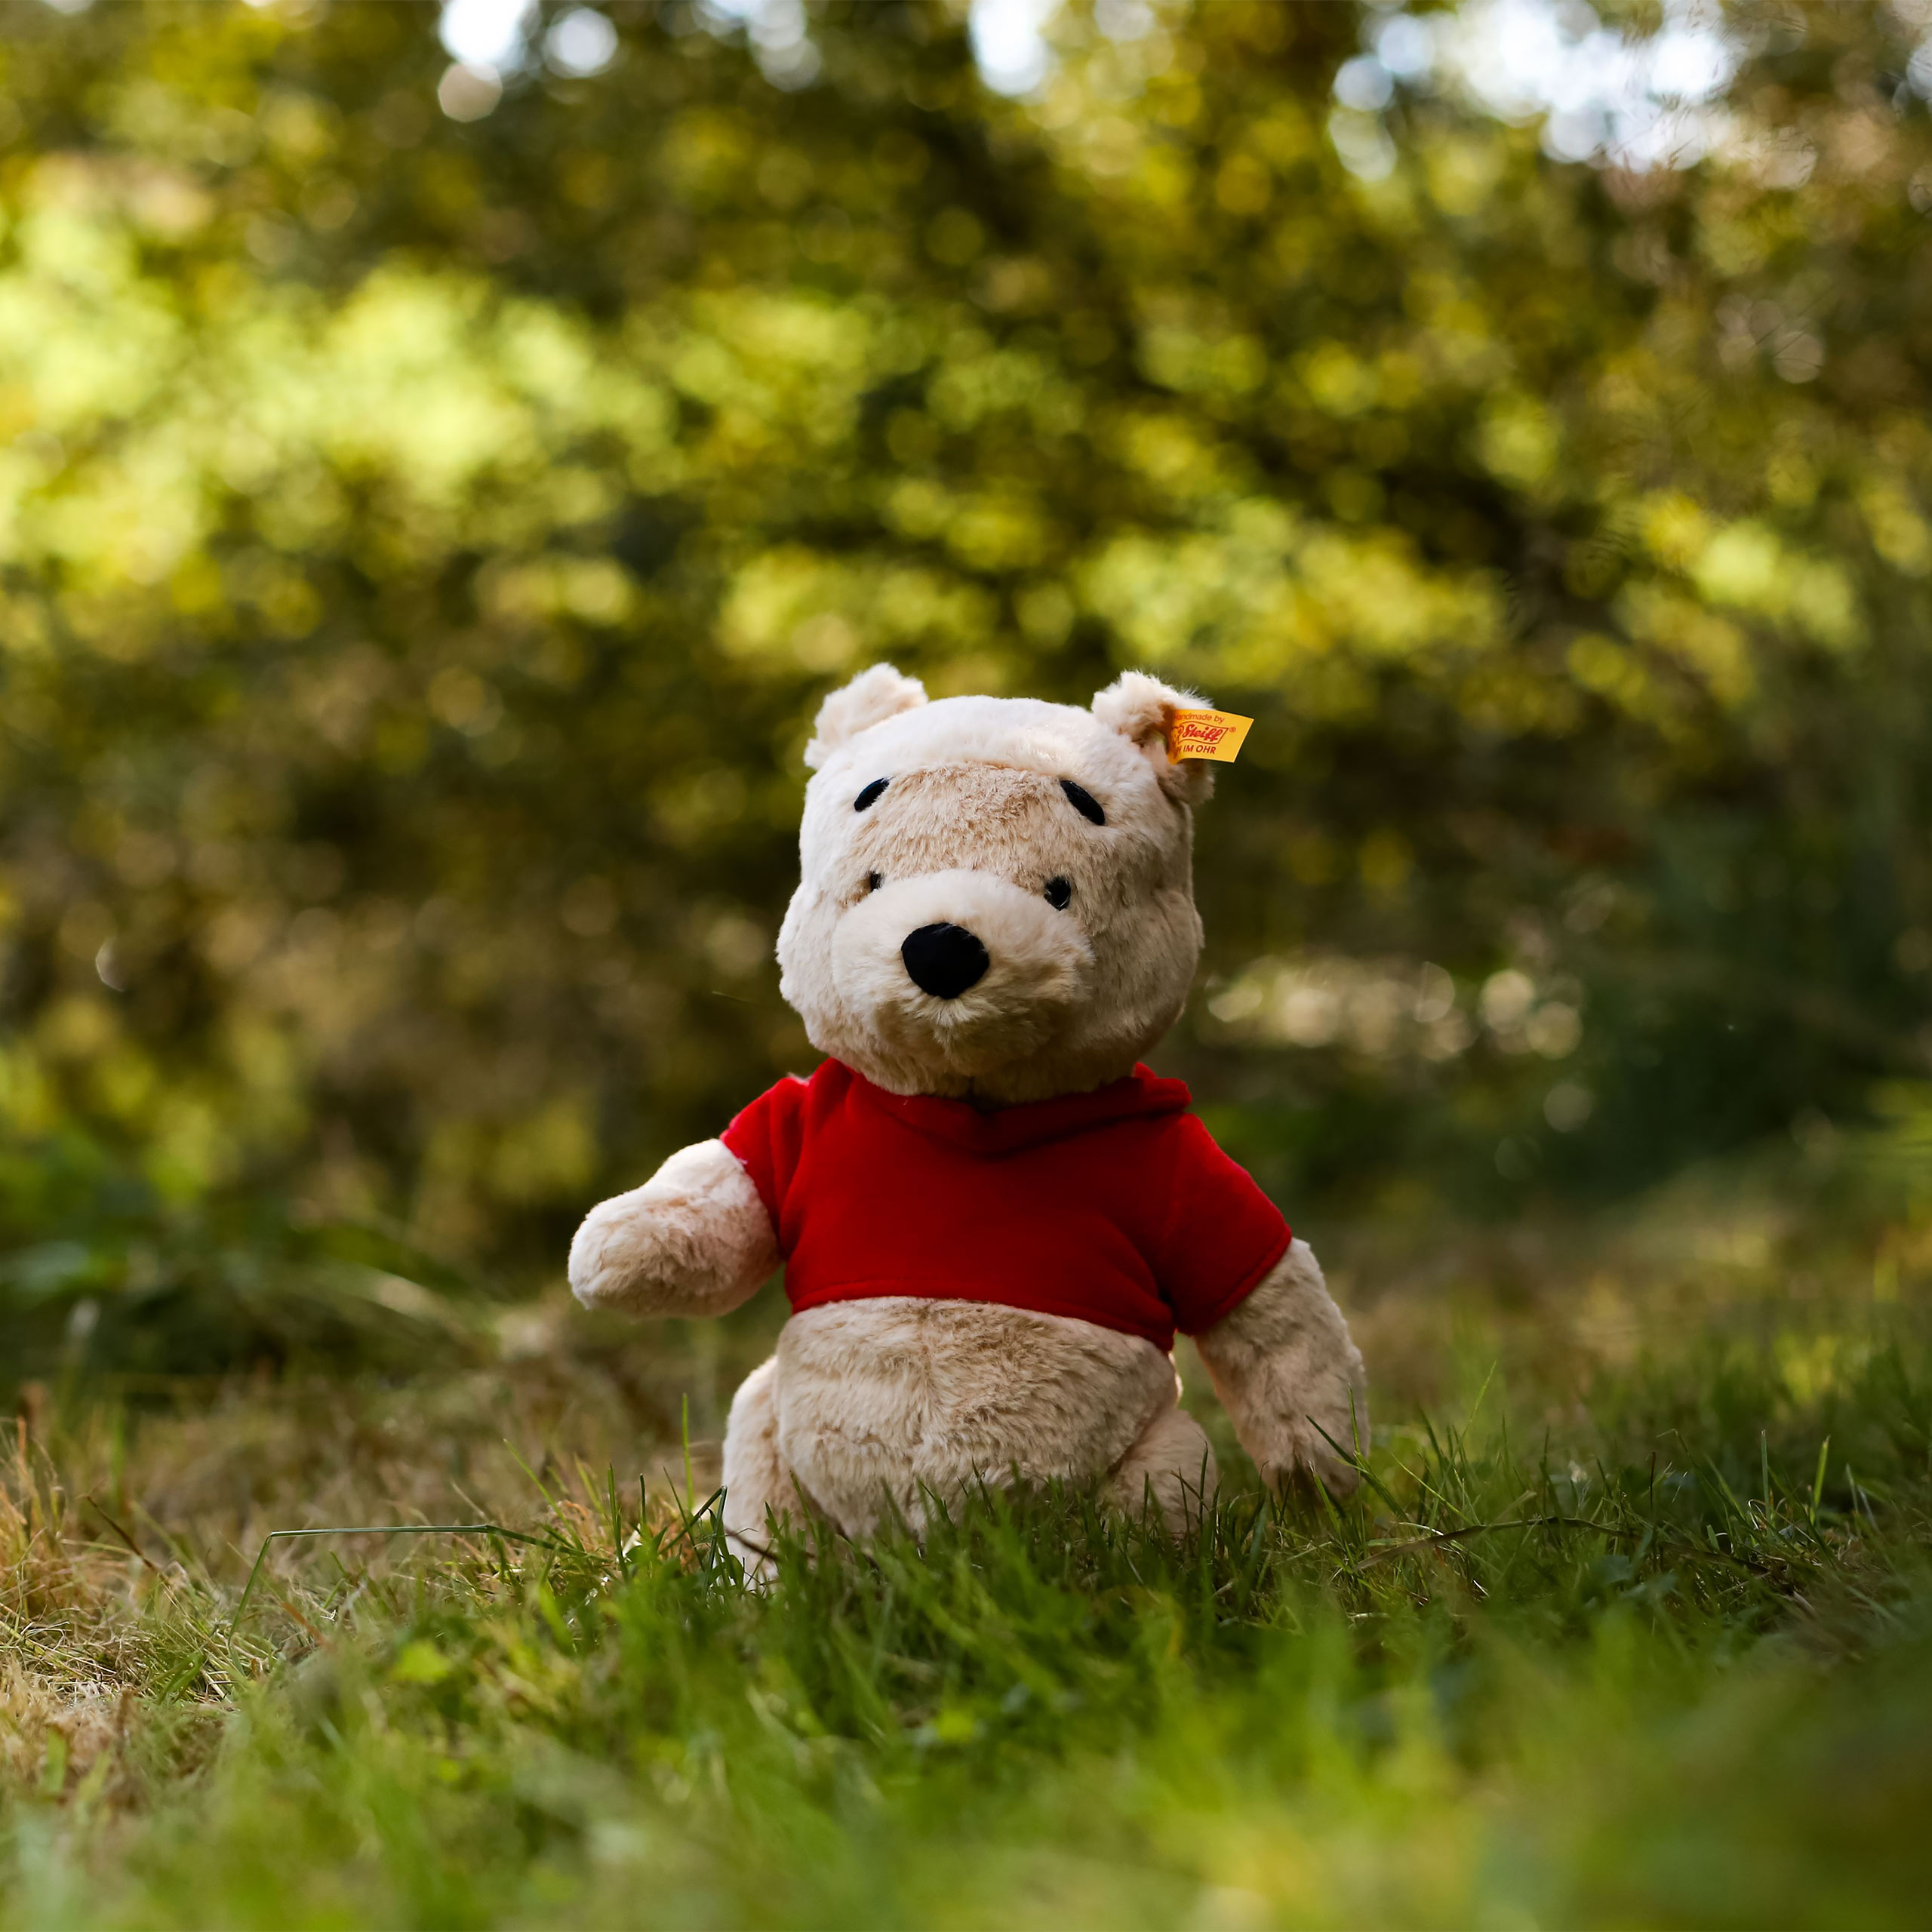 Winnie the Pooh - Collector's Figure by Steiff